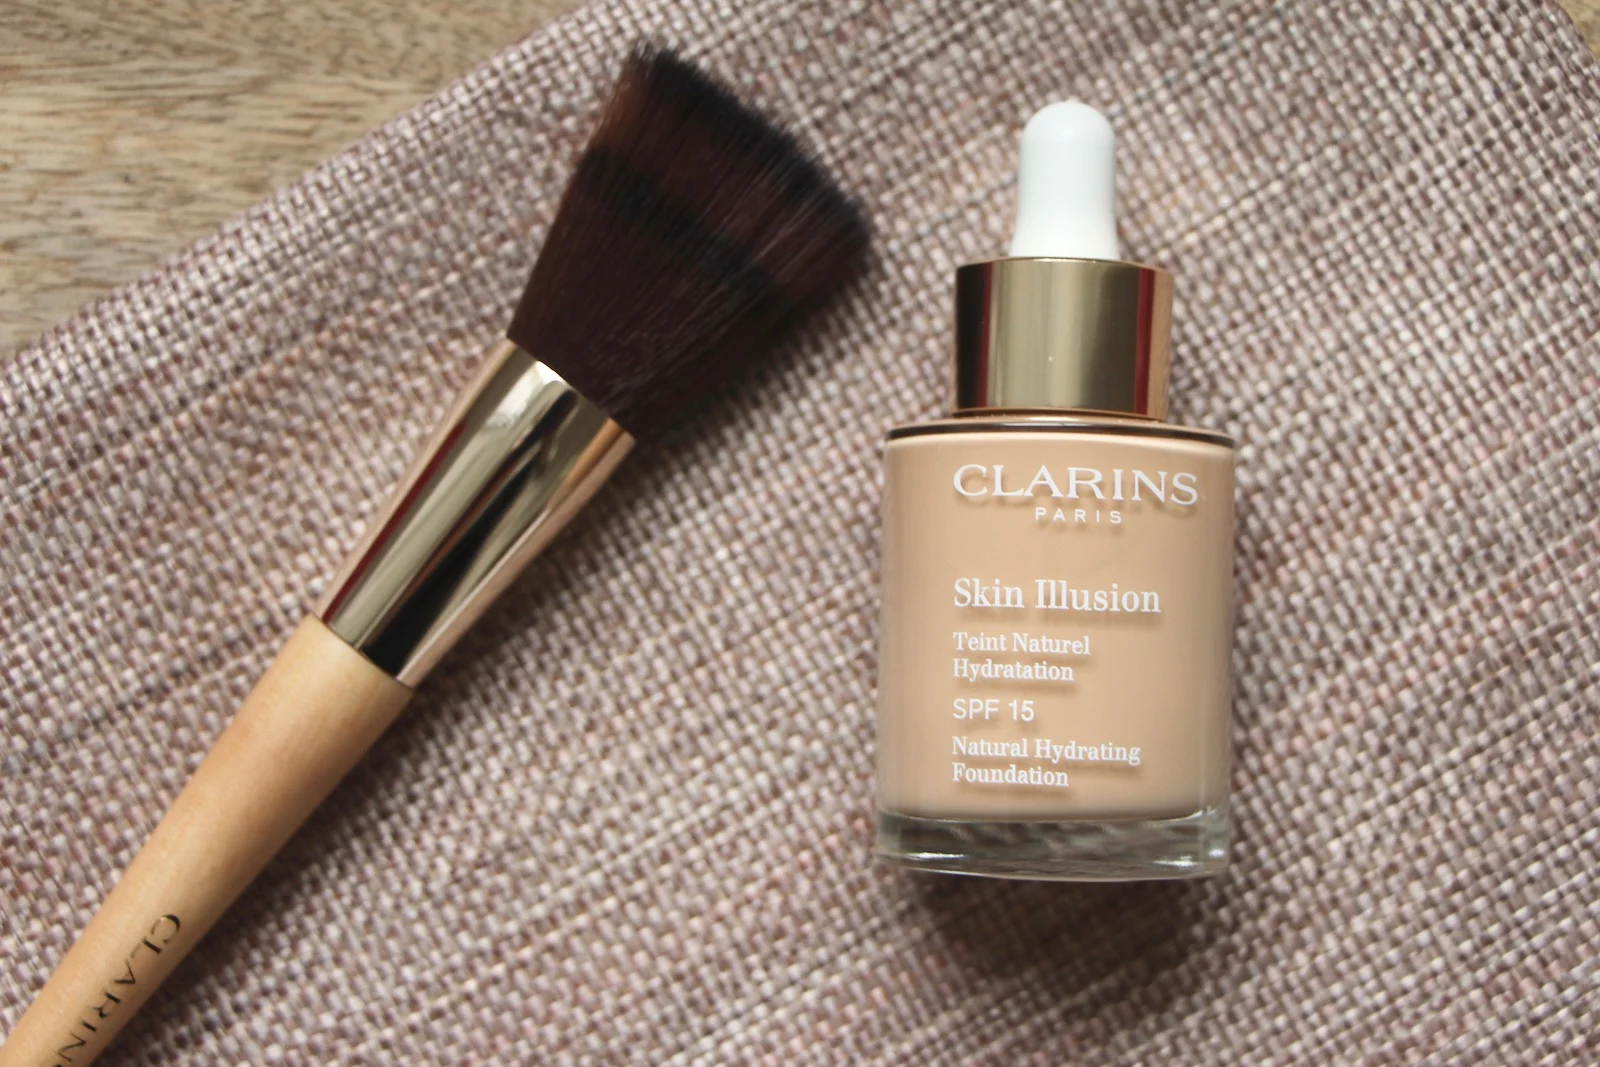 Foundation Review: Clarins Skin Illusion